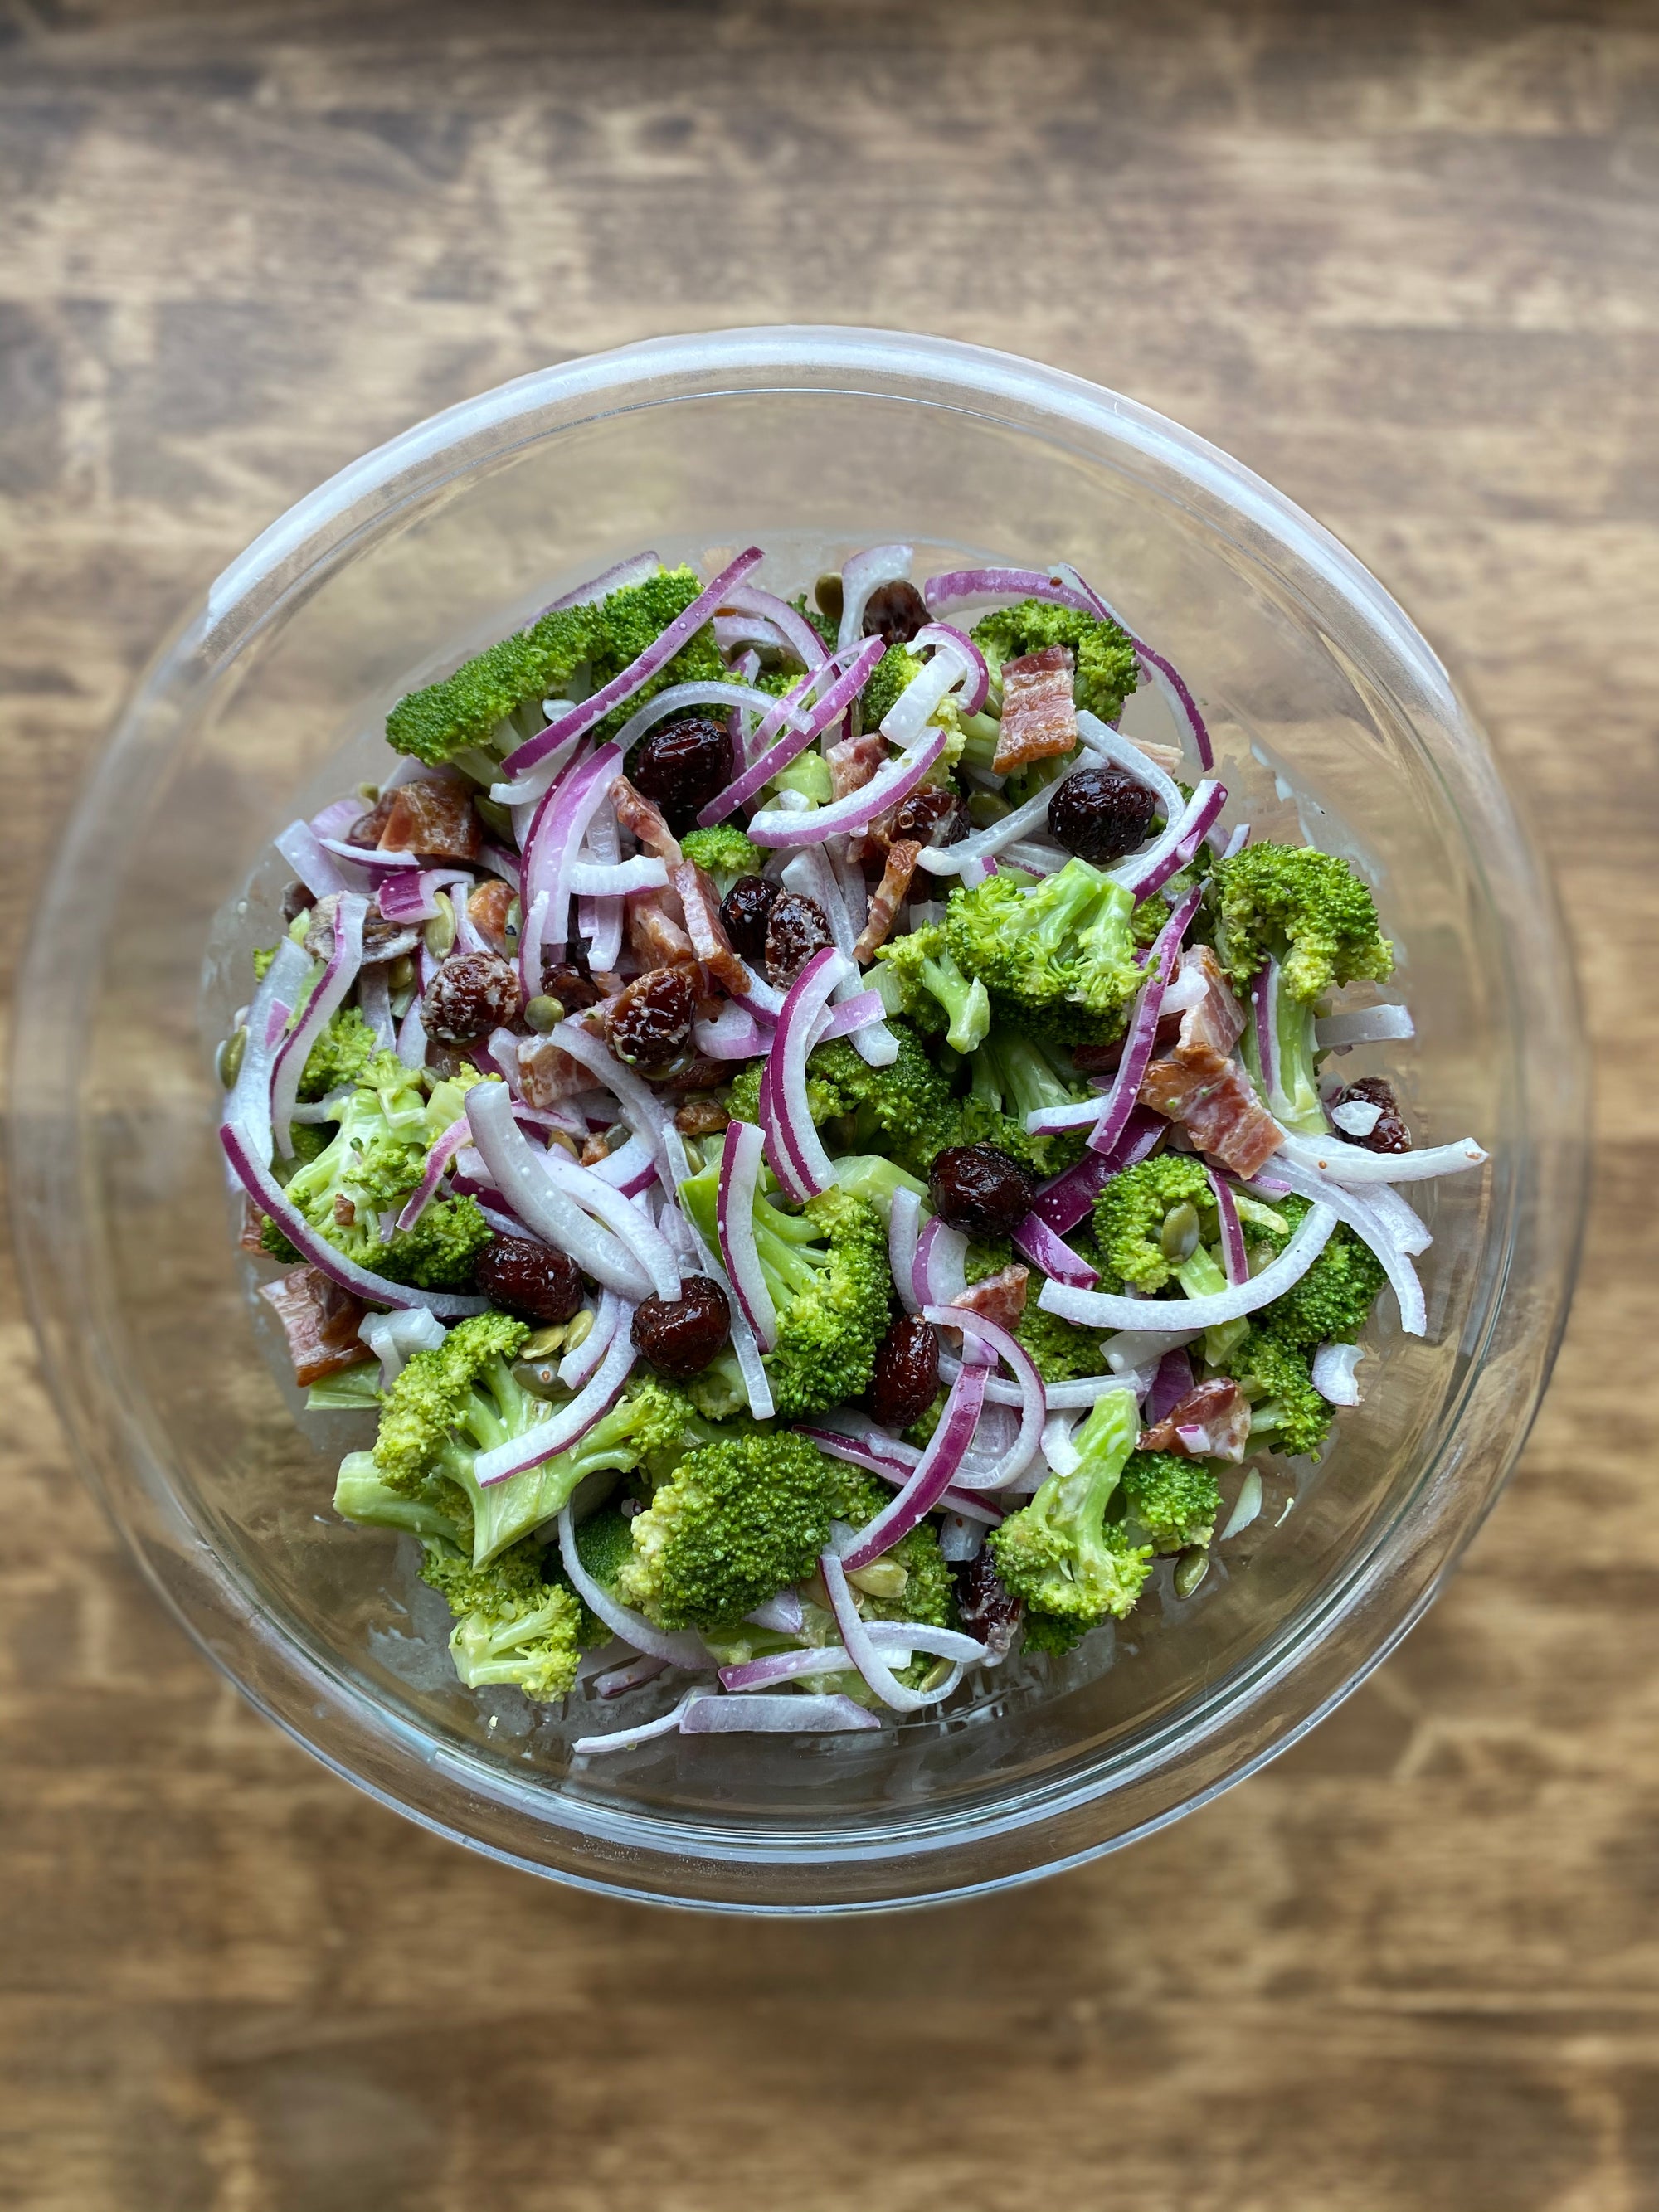 Self Care Series - Healthy Eating with Broccoli Salad